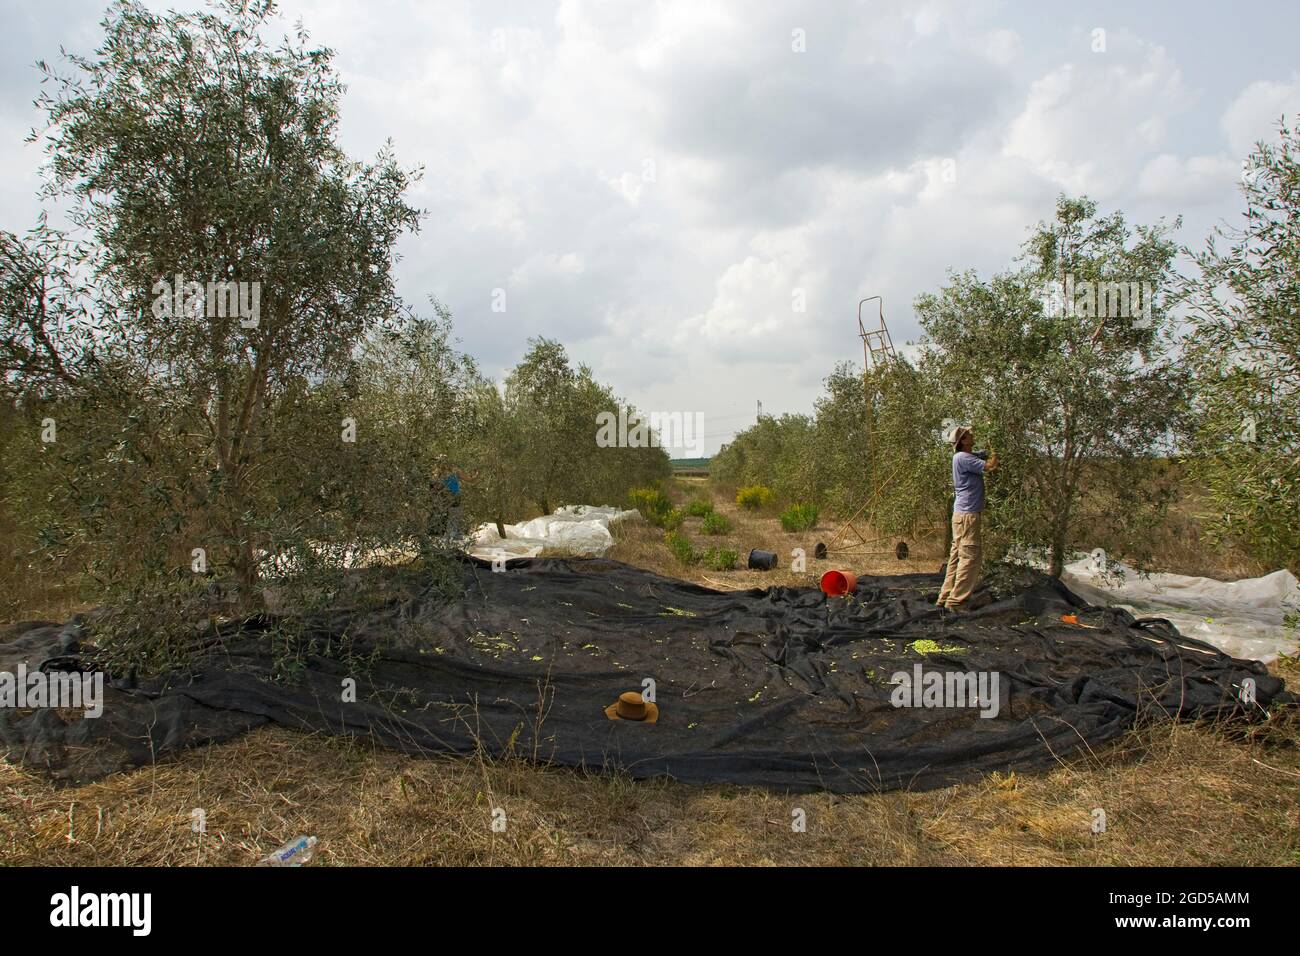 Picking Olives in an olive grove. Photographed in Israel. The usual method is to place a cloth under the tree and then hit the branches. The ripe oliv Stock Photo